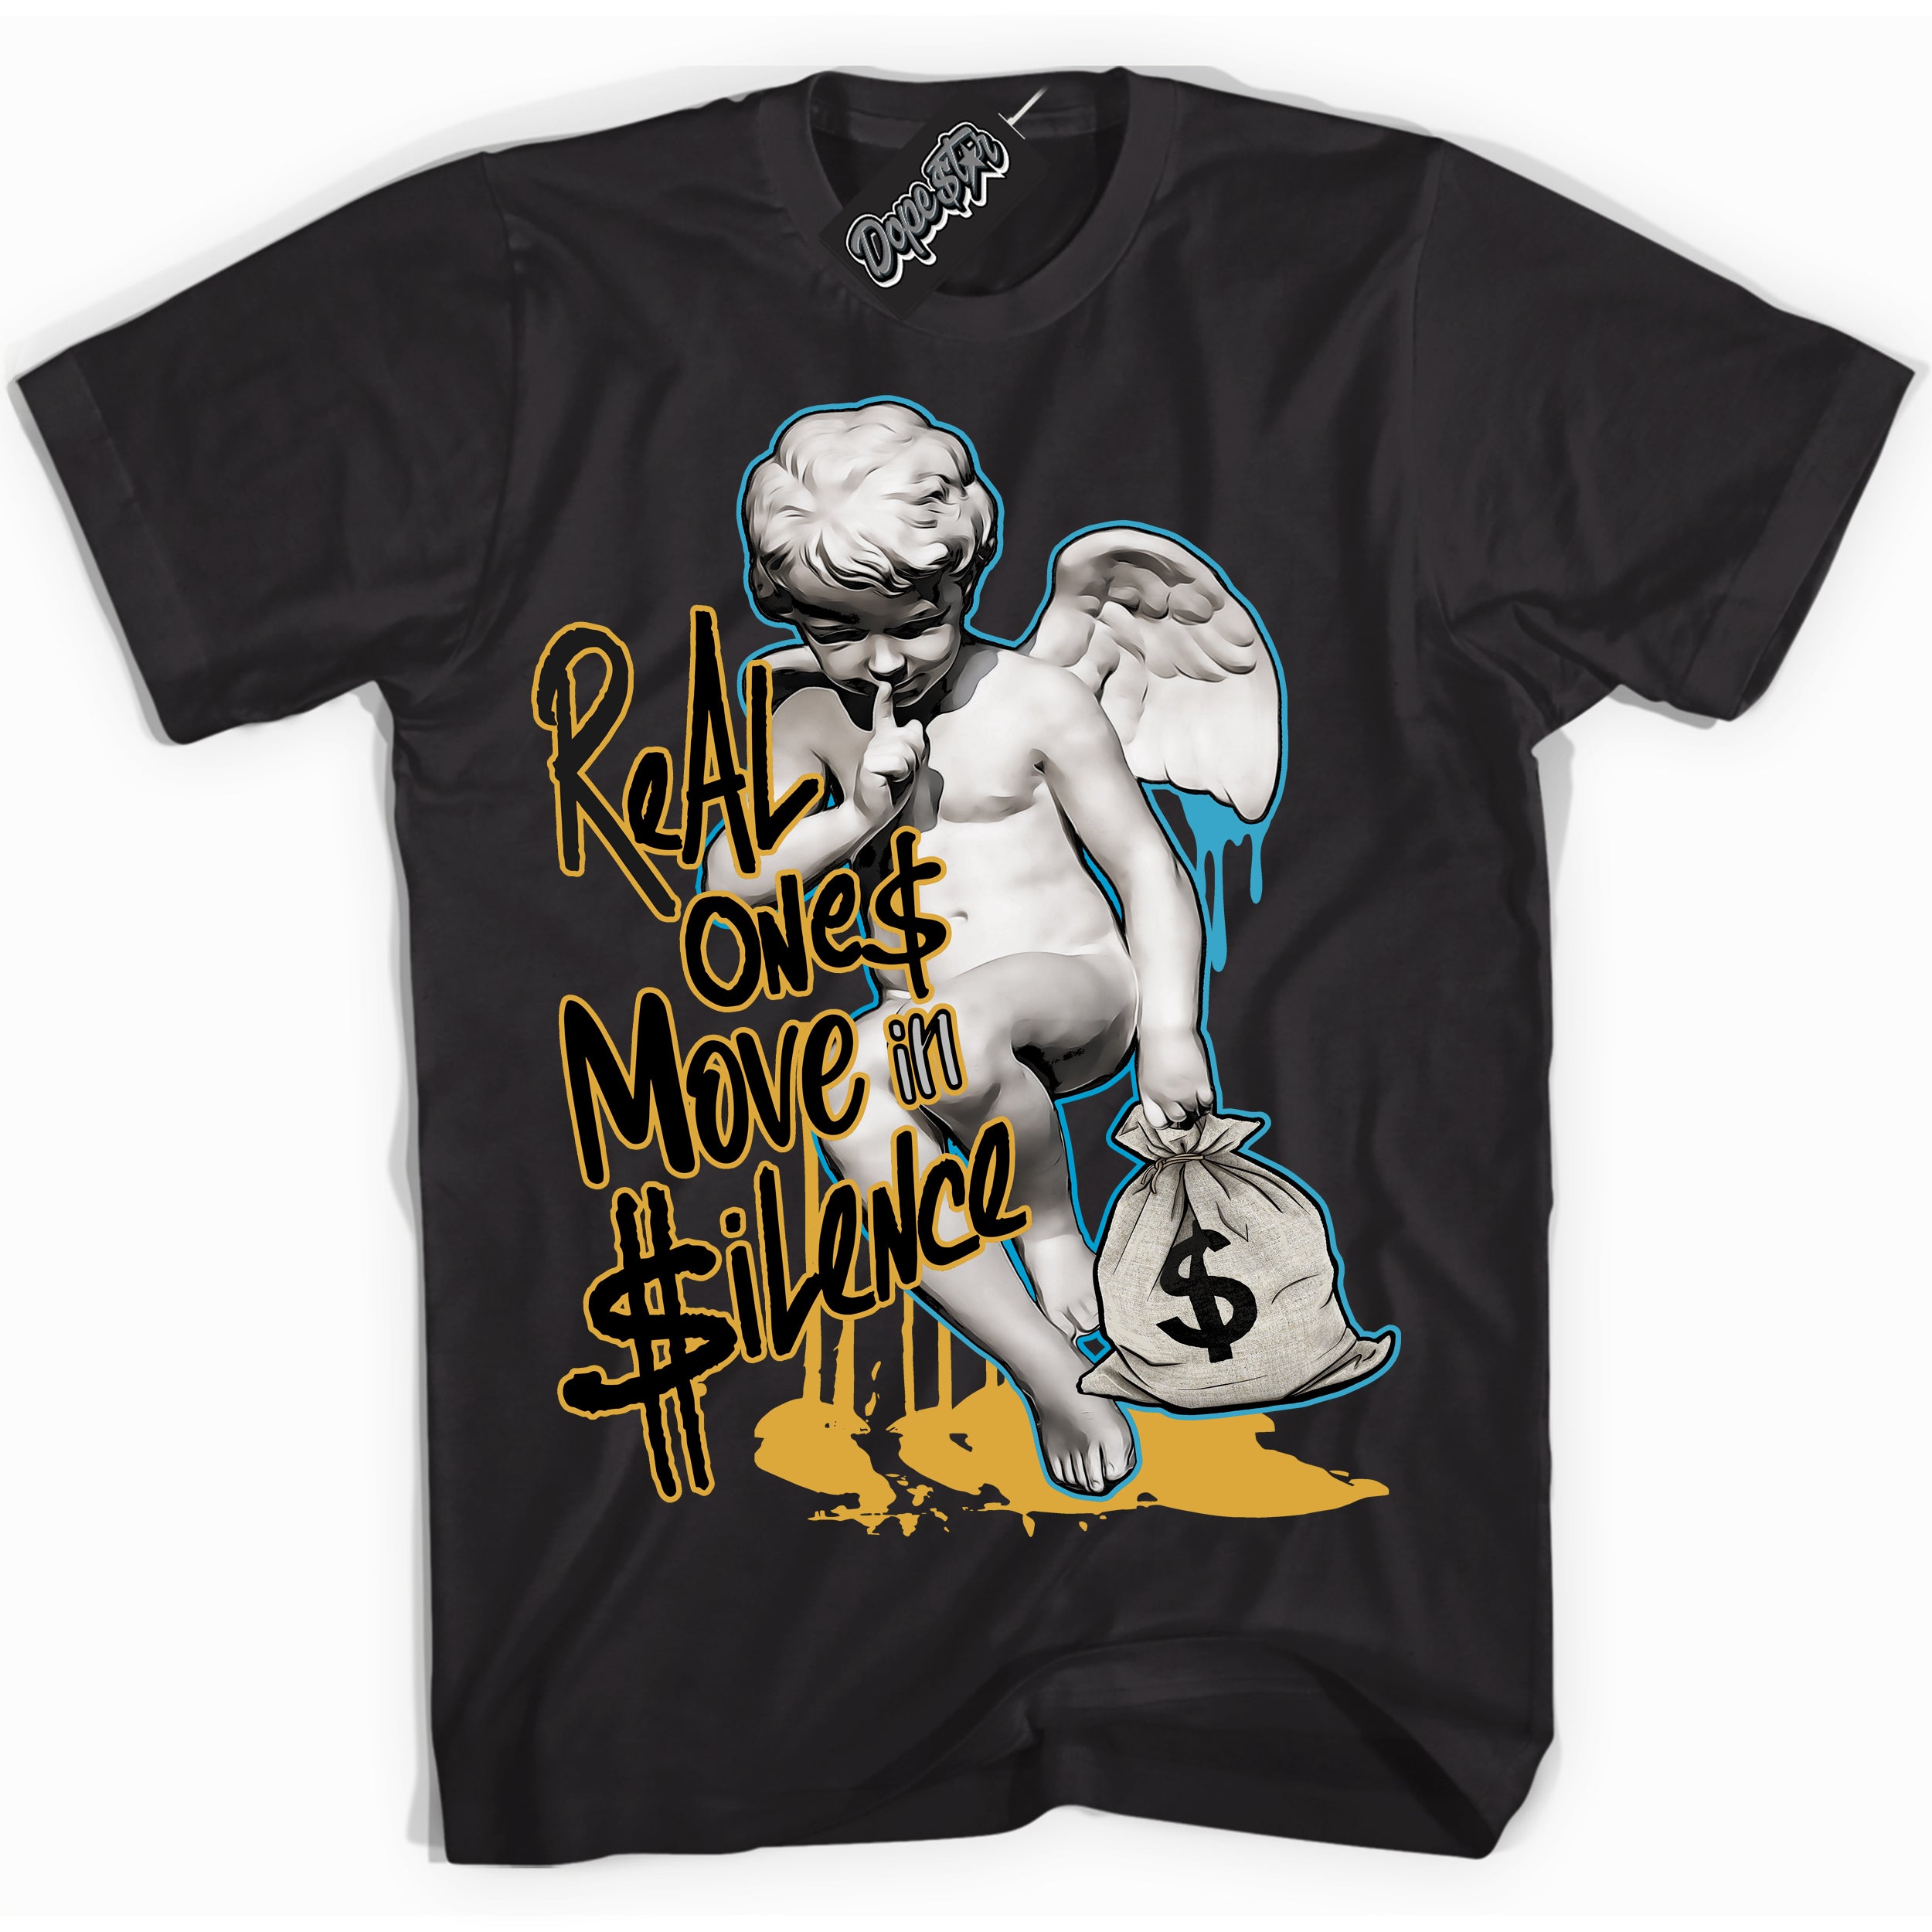 Cool Black Shirt with “ Real Ones Cherub” design that perfectly matches Aqua 5s Sneakers.